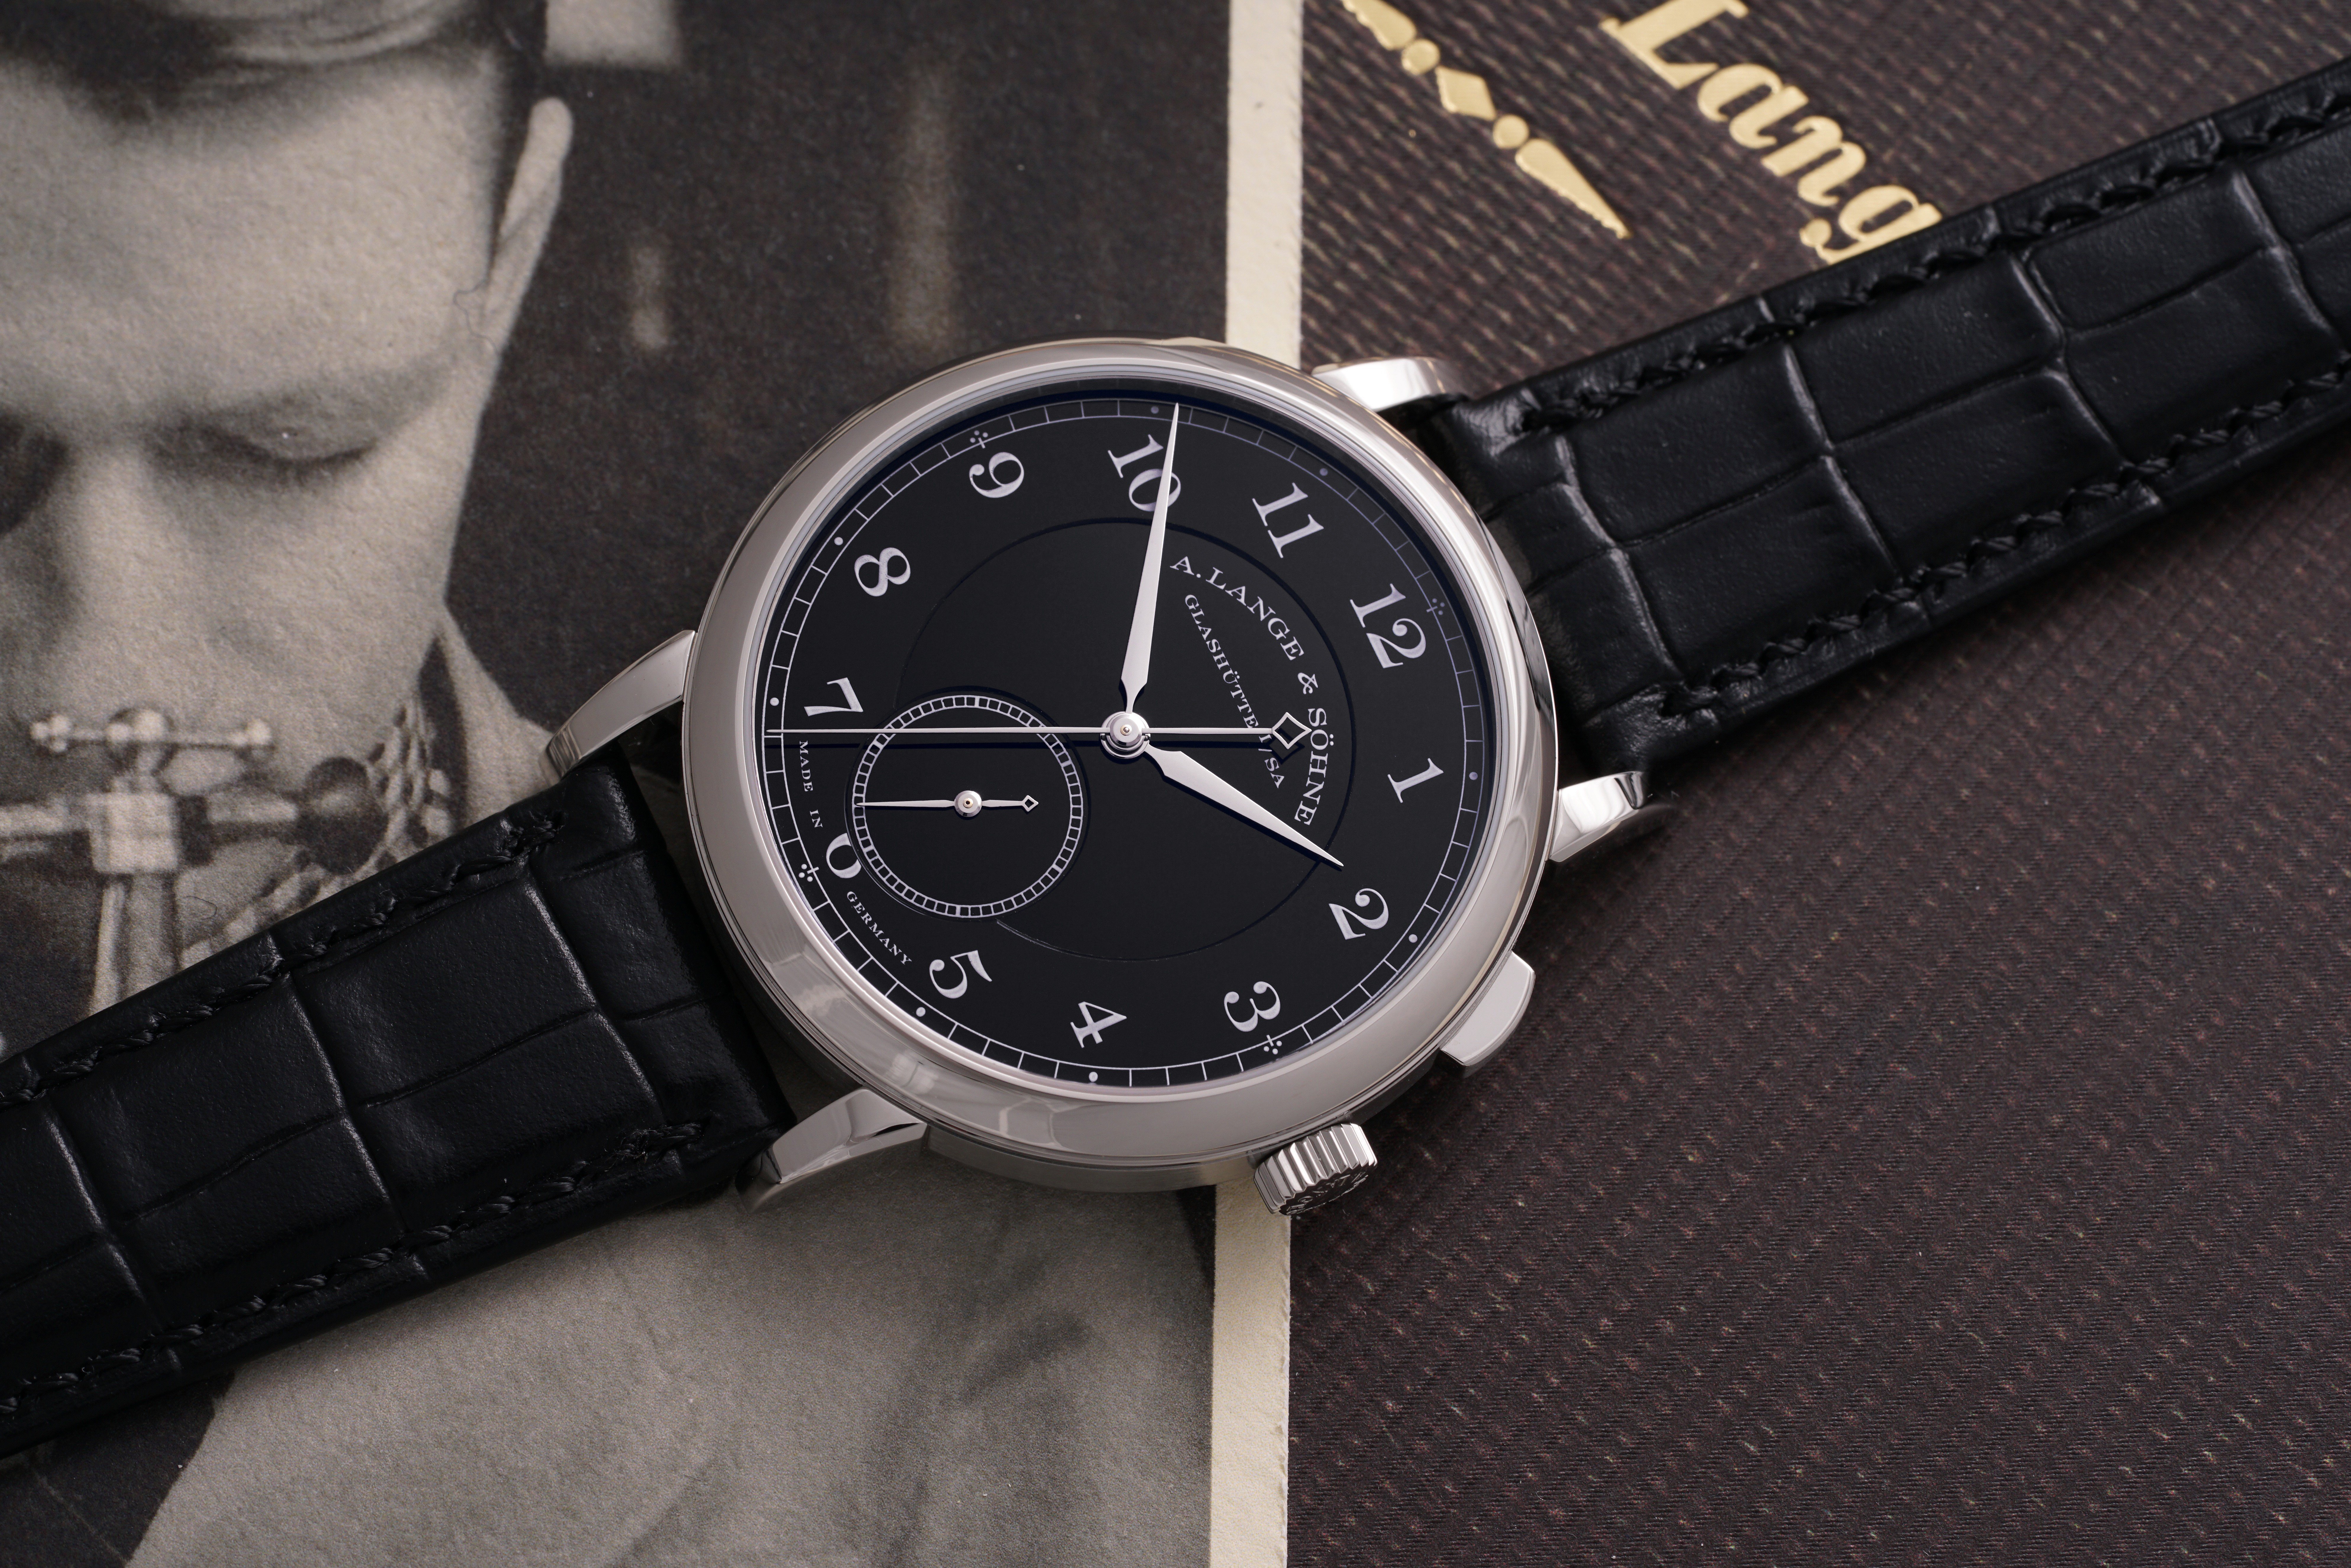 A. Lange & Söhne’s ‘Homage to Walter Lange’ will be auctioned at Phillips.